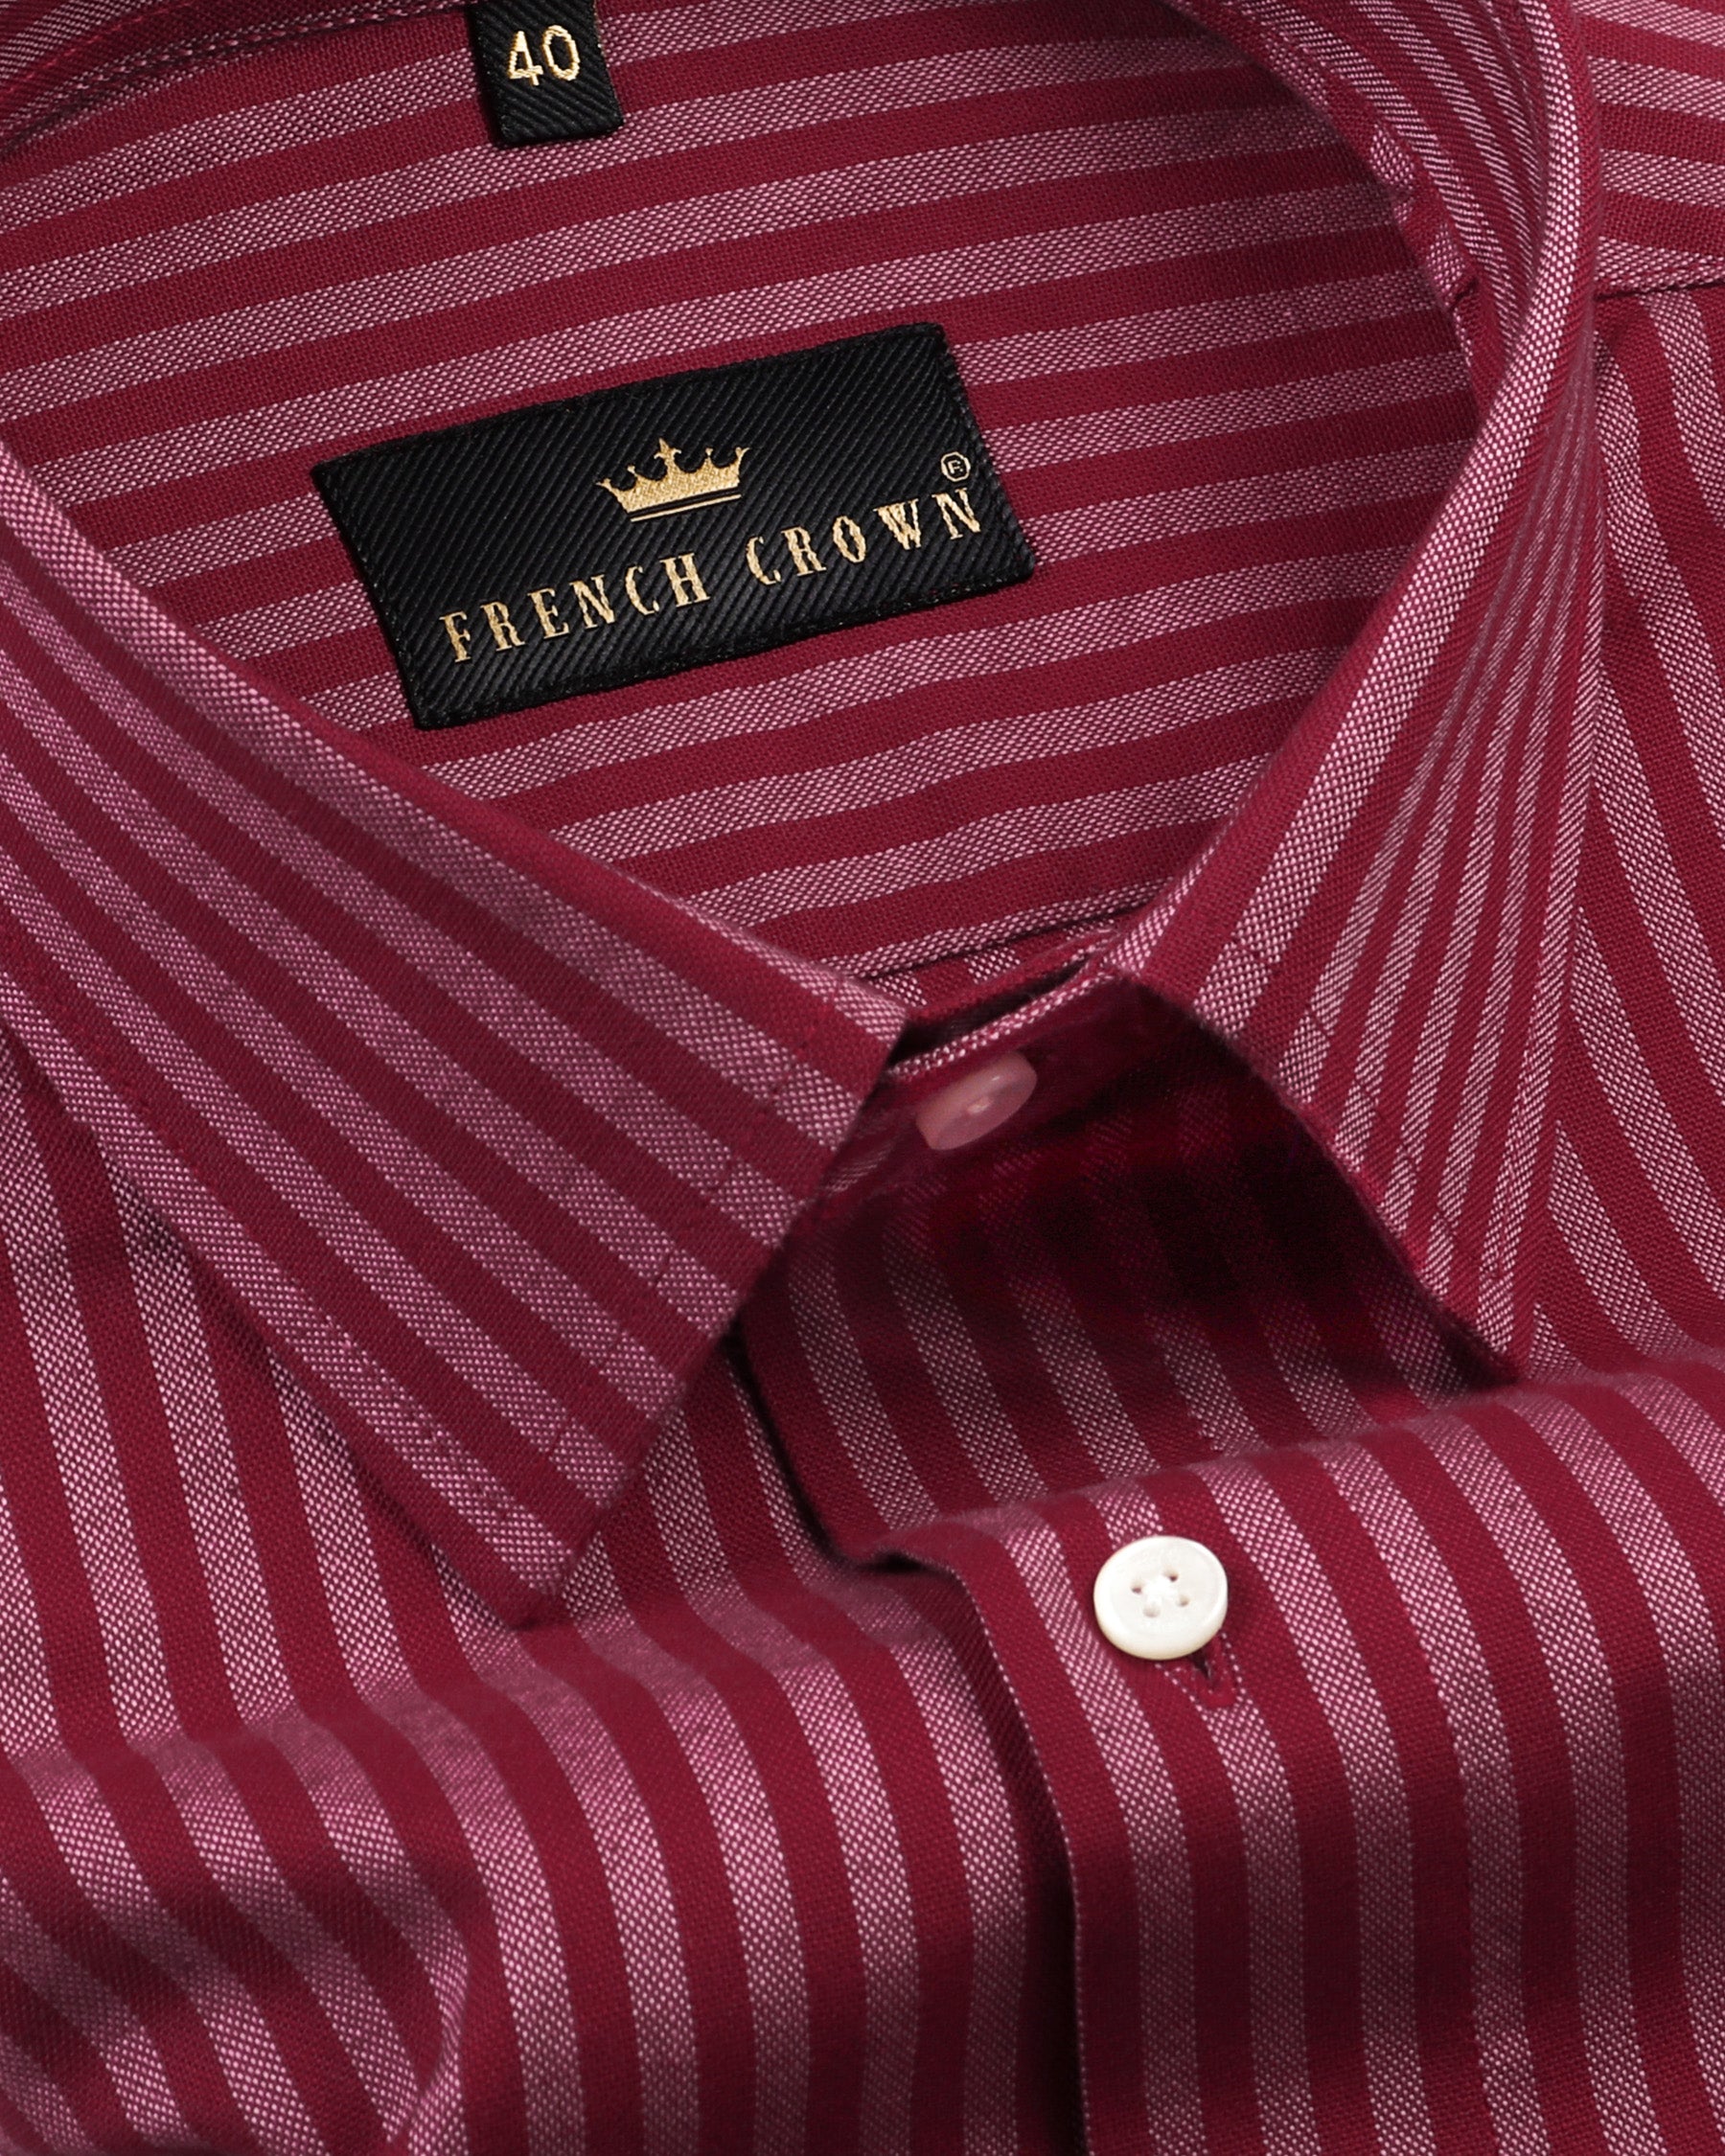 Vermilion Red Striped Royal Oxford Over Shirt 3627-H-38, 3627-42, 3627-H-42, 3627-H-39, 3627-40, 3627-46, 3627-H-46, 3627-38, 3627-39, 3627-H-40, 3627-44, 3627-H-44, 3627-48, 3627-H-48, 3627-50, 3627-H-50, 3627-52, 3627-H-52